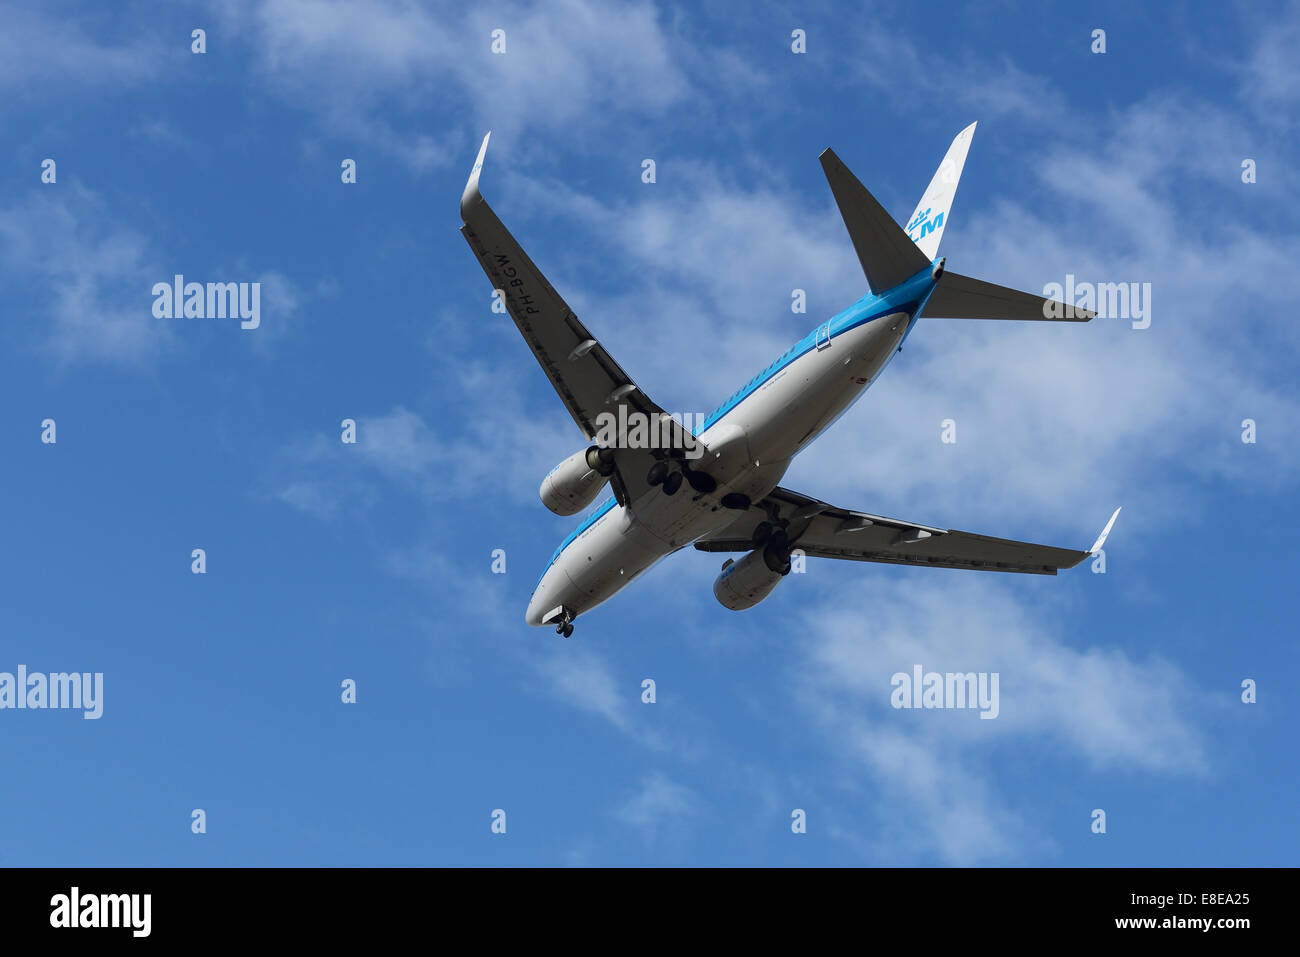 Royal Dutch Airlines KLM Boeing 737 aircraft on the final approach to Manchester Airport UK Stock Photo